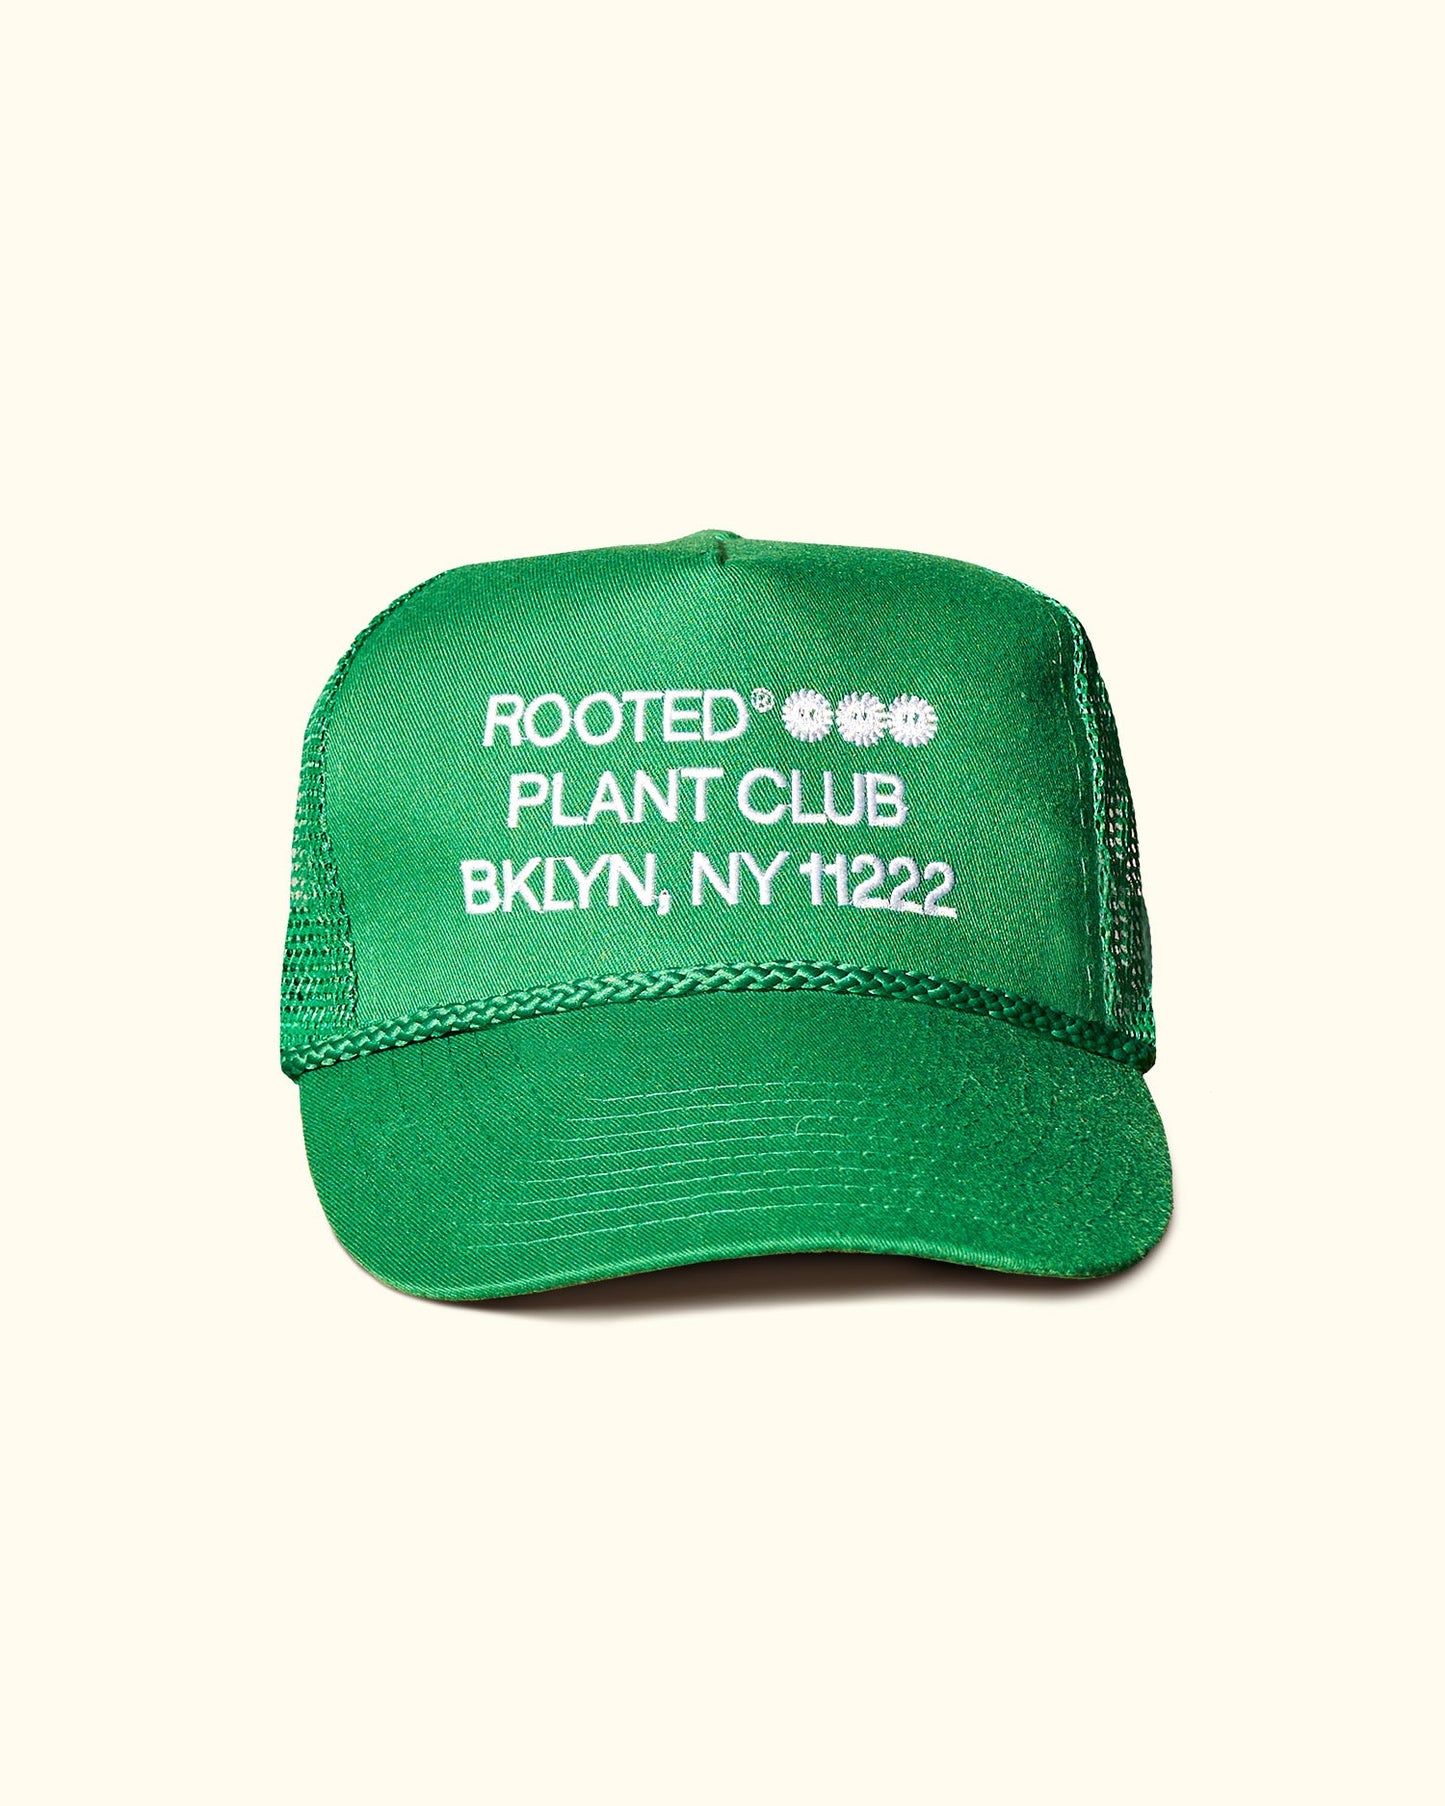 A green colored trucker hat that reads: Rooted Plant Club. BKLYN, NY 11222